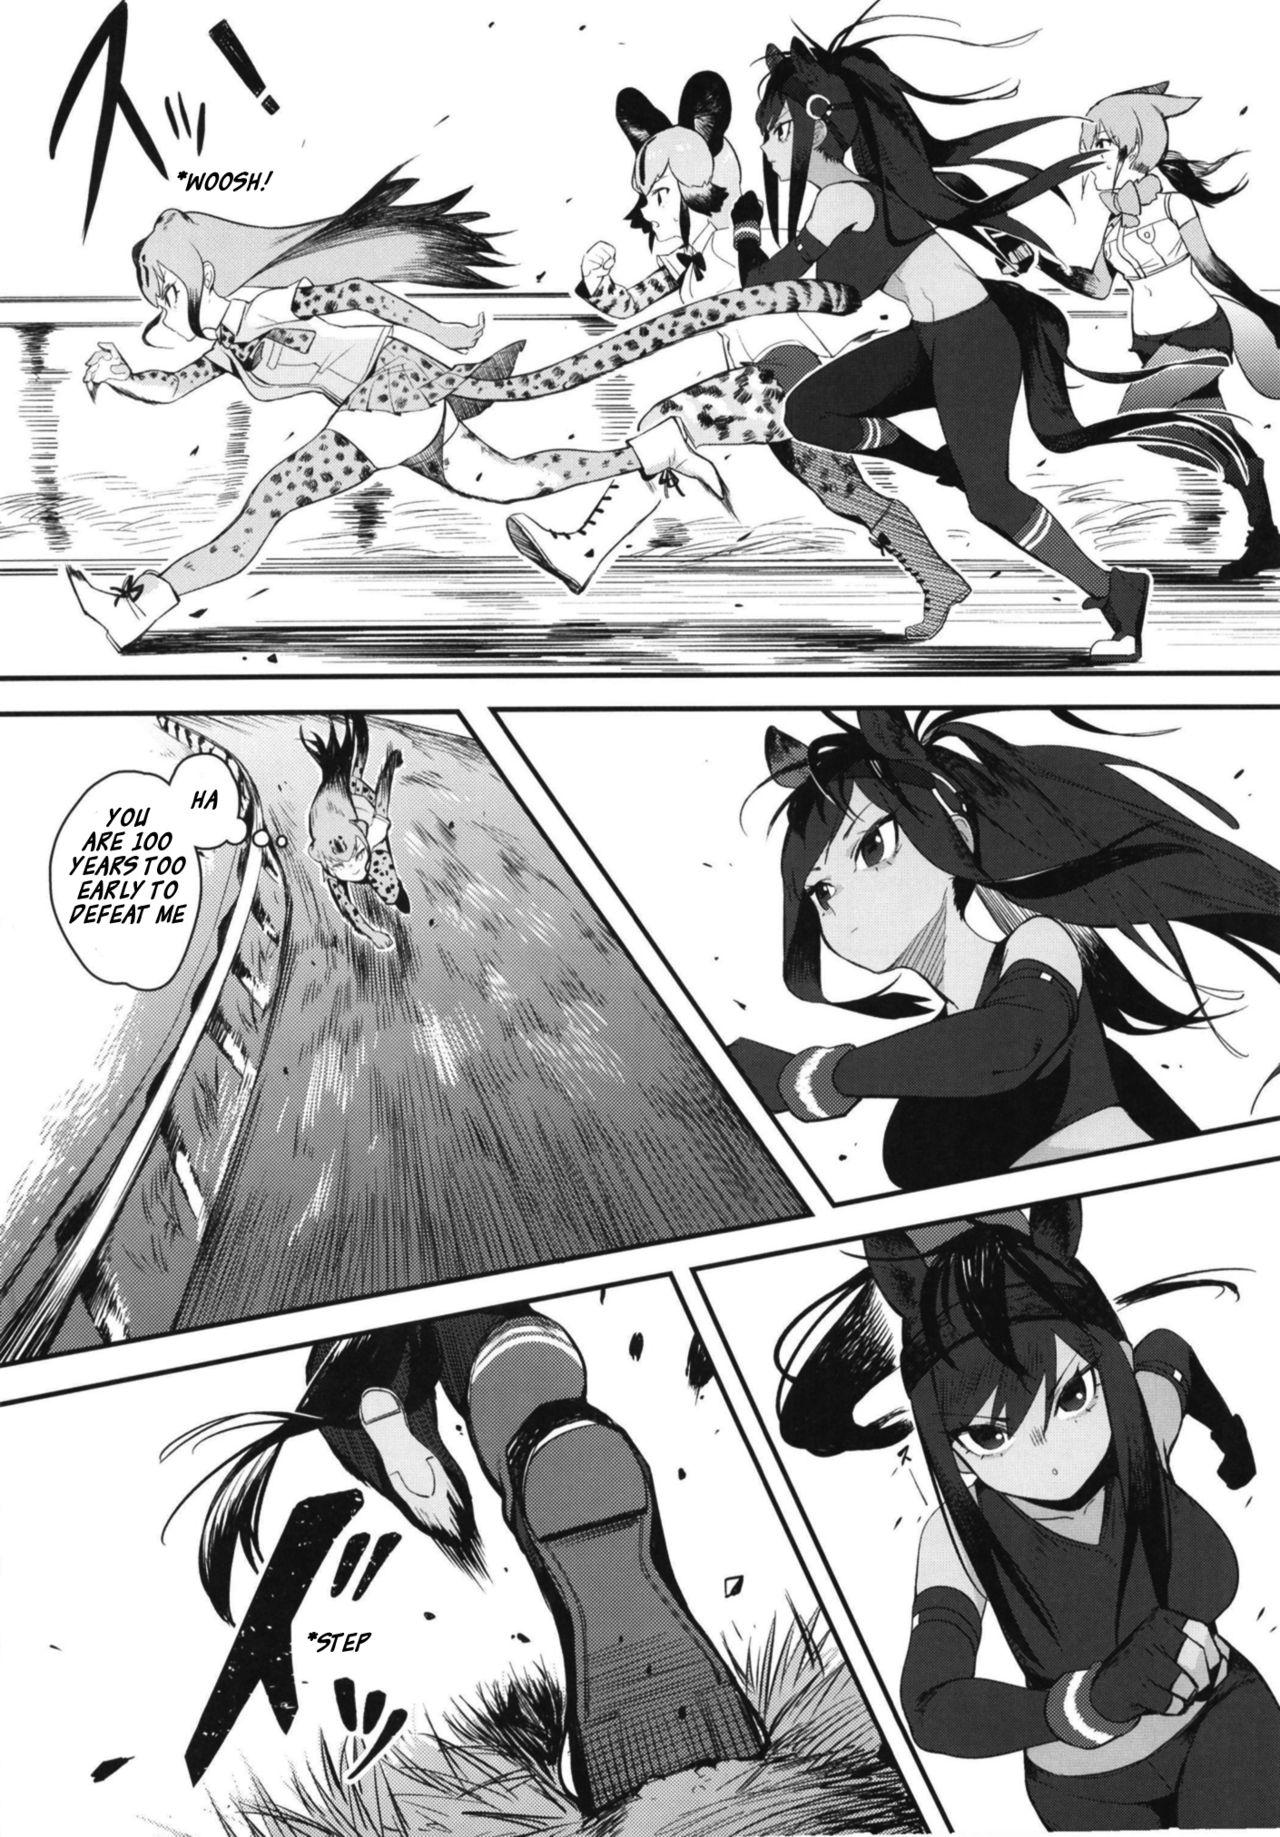 Spreadeagle Thoroughbred Early Days 2 - Kemono friends Dominant - Page 4